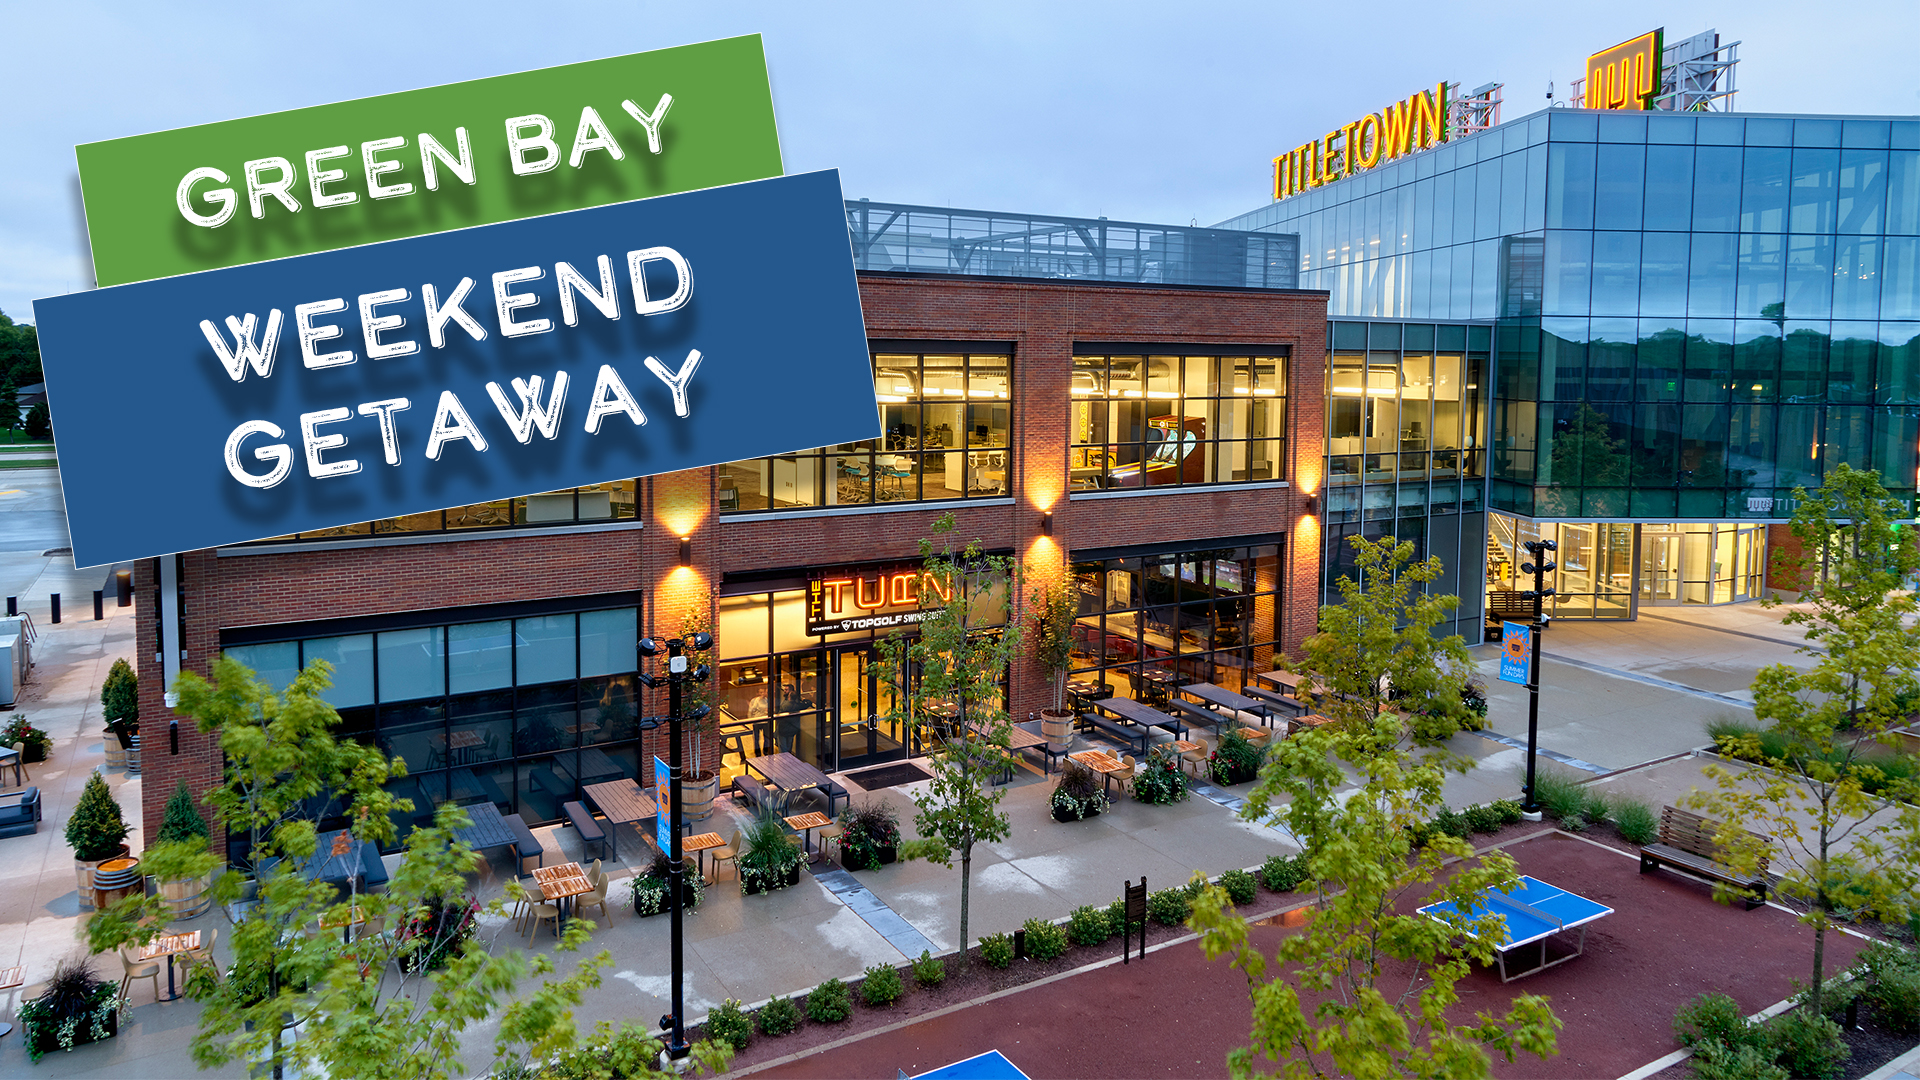 Enter to Win a Weekend Getaway to Green Bay